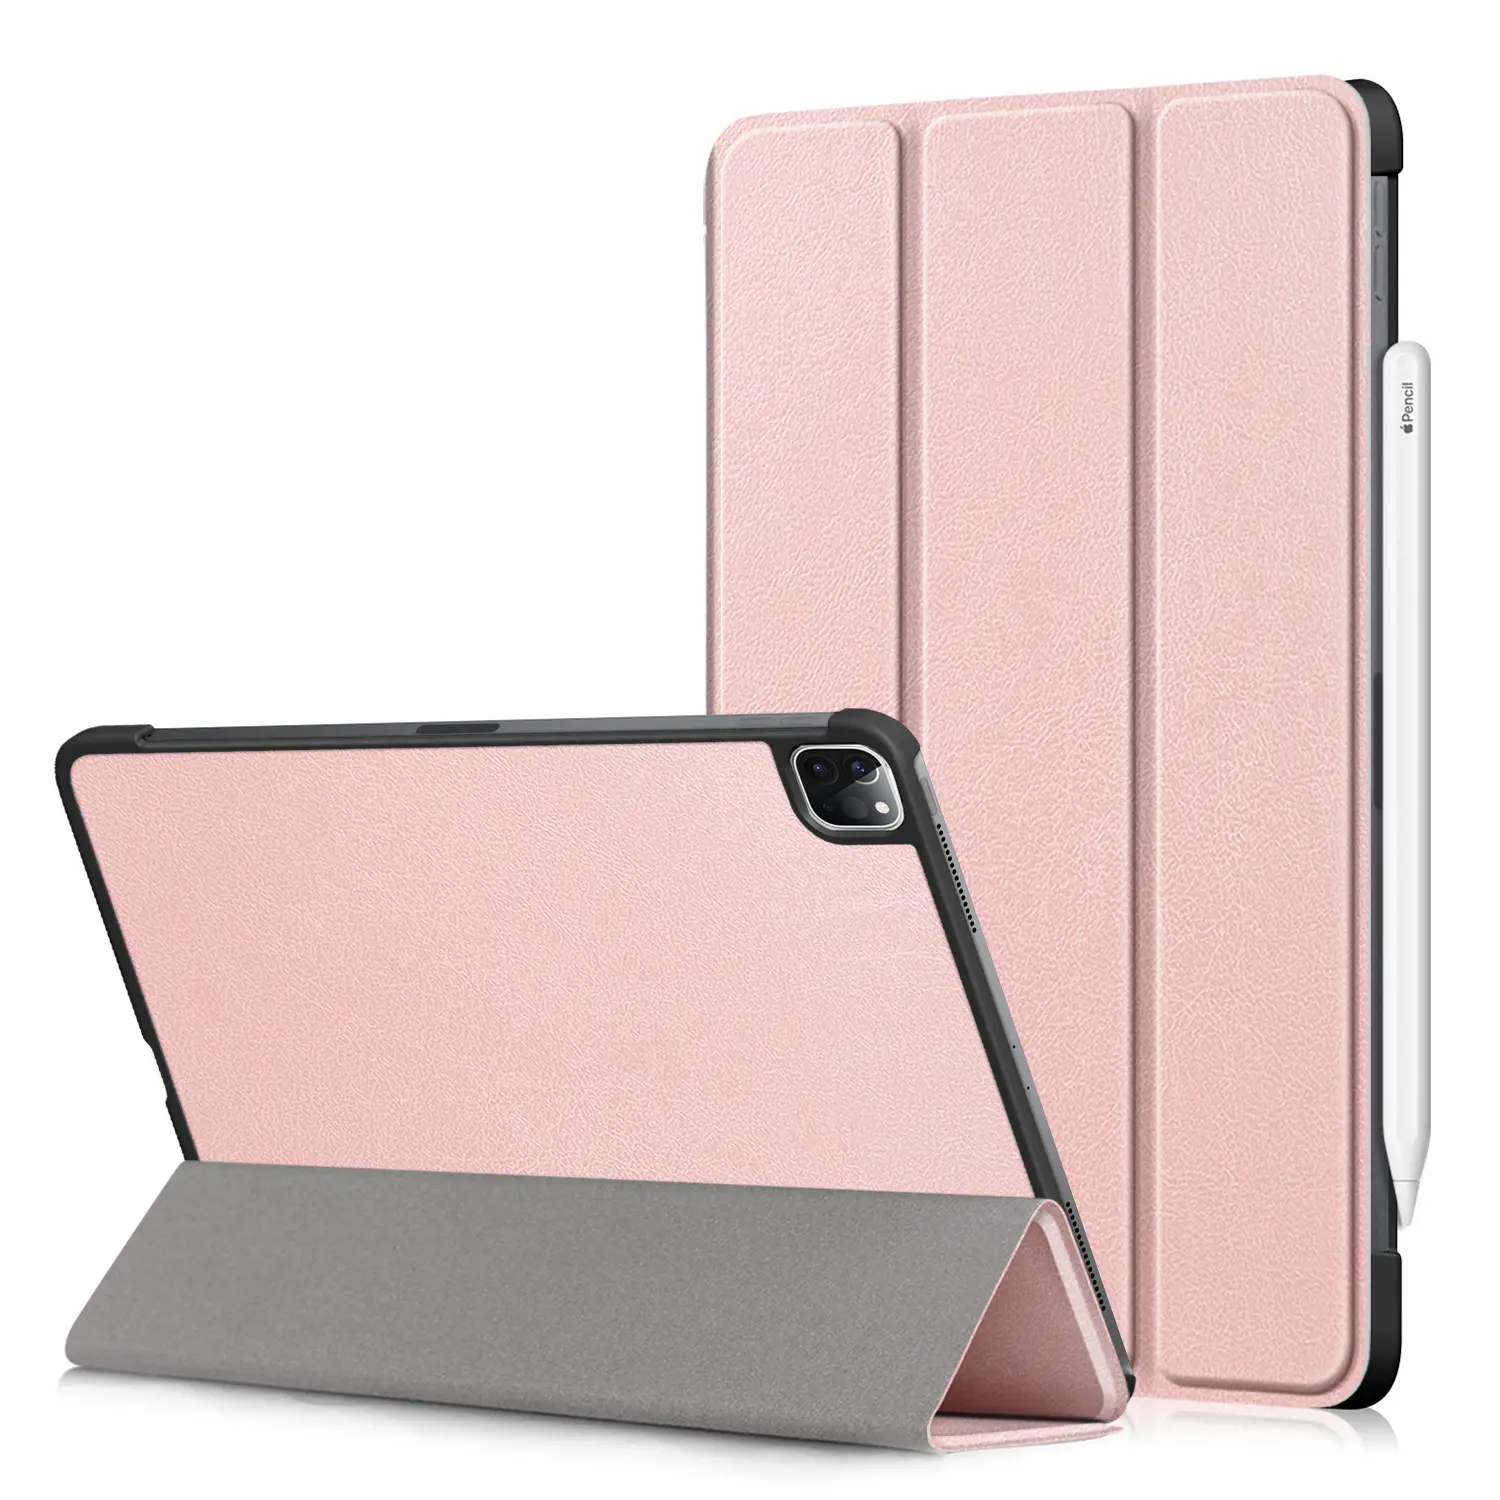 Folding Stand Smart Sleep Wake Flip Cover Leather Tablet Case For Ipad Pro 11 11inch Slim Magnetic Full Protect Cover